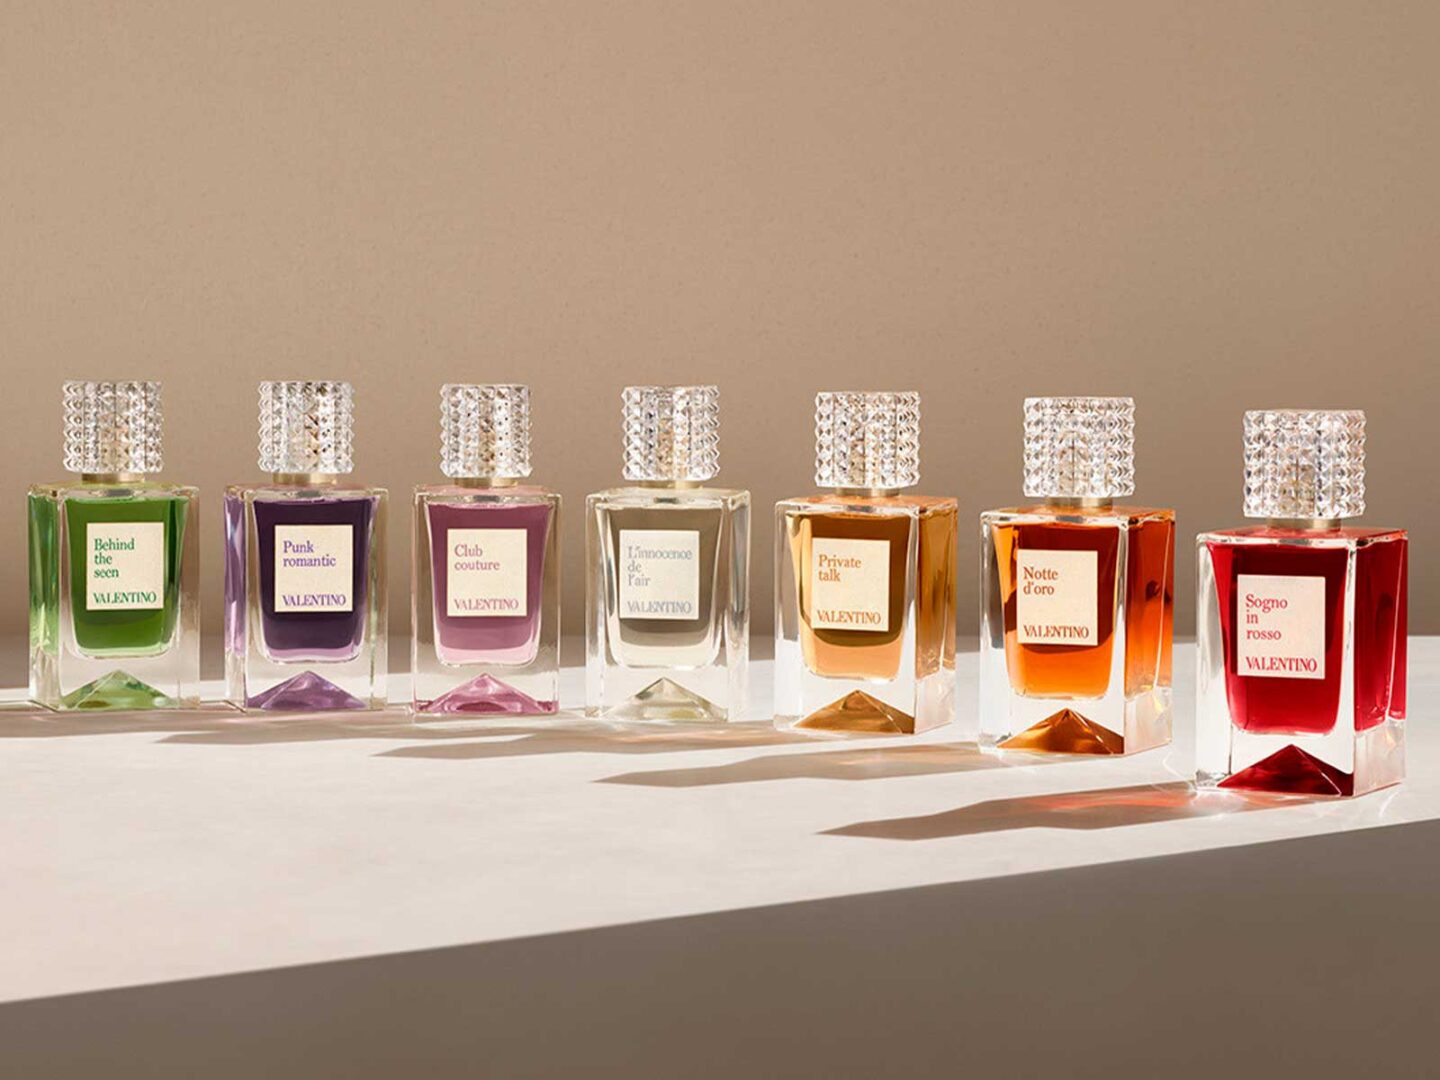 Valentino launches haute couture fragrance collection